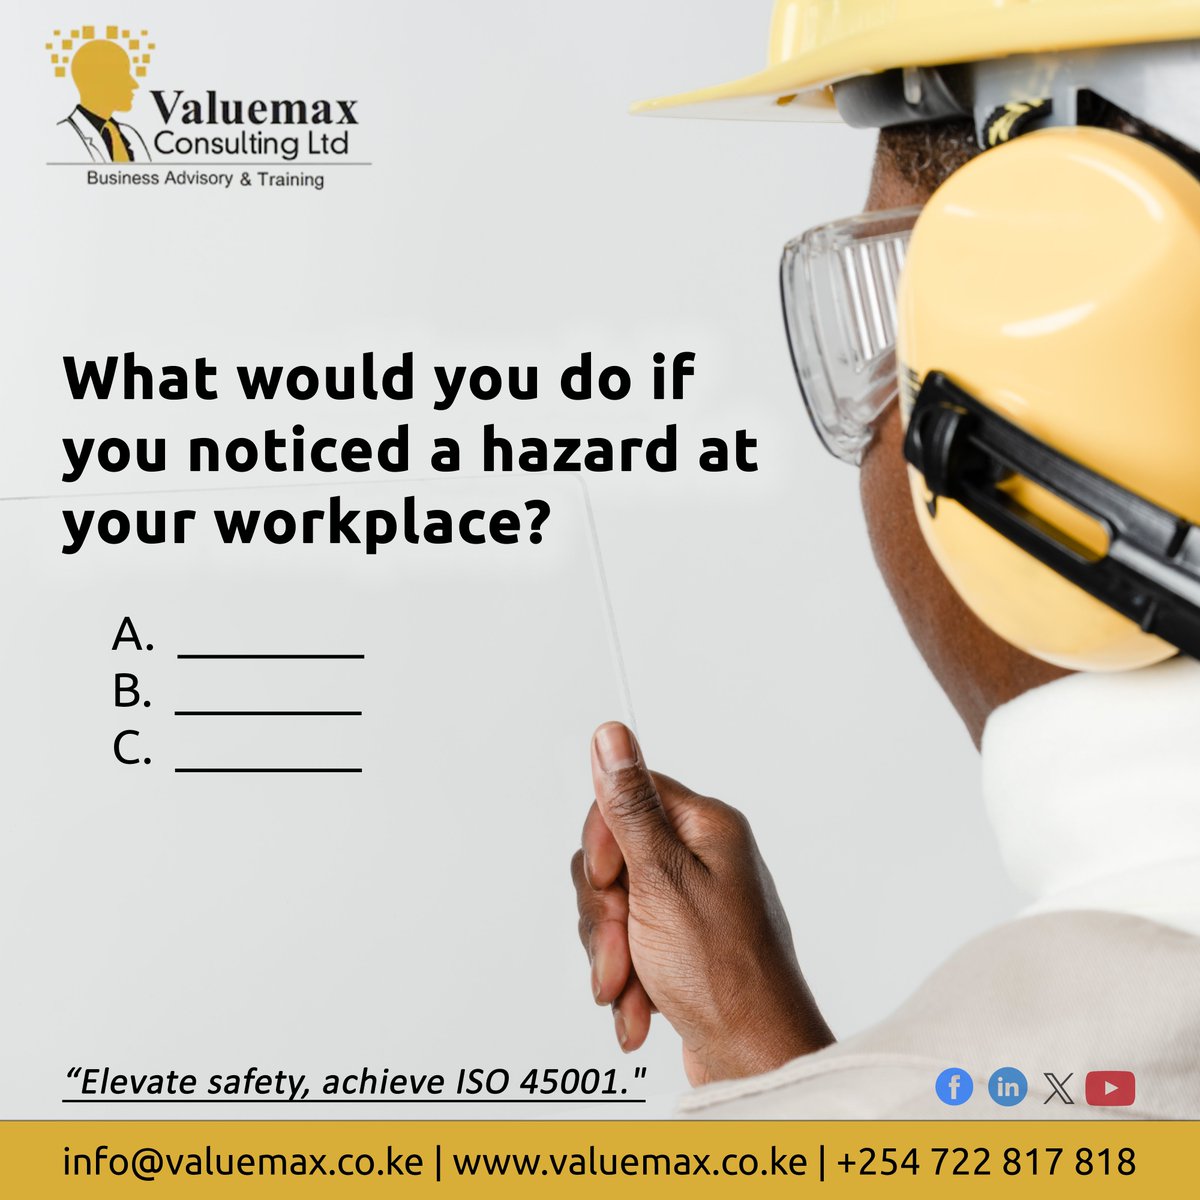 Safety at the workplace is a conversation we need to have. If you noted a hazard at your place of work, what actions would you take?

#OHS #Worksafety #occupationalsafety #safety #Tuesday #ISOStandards #Valuemax